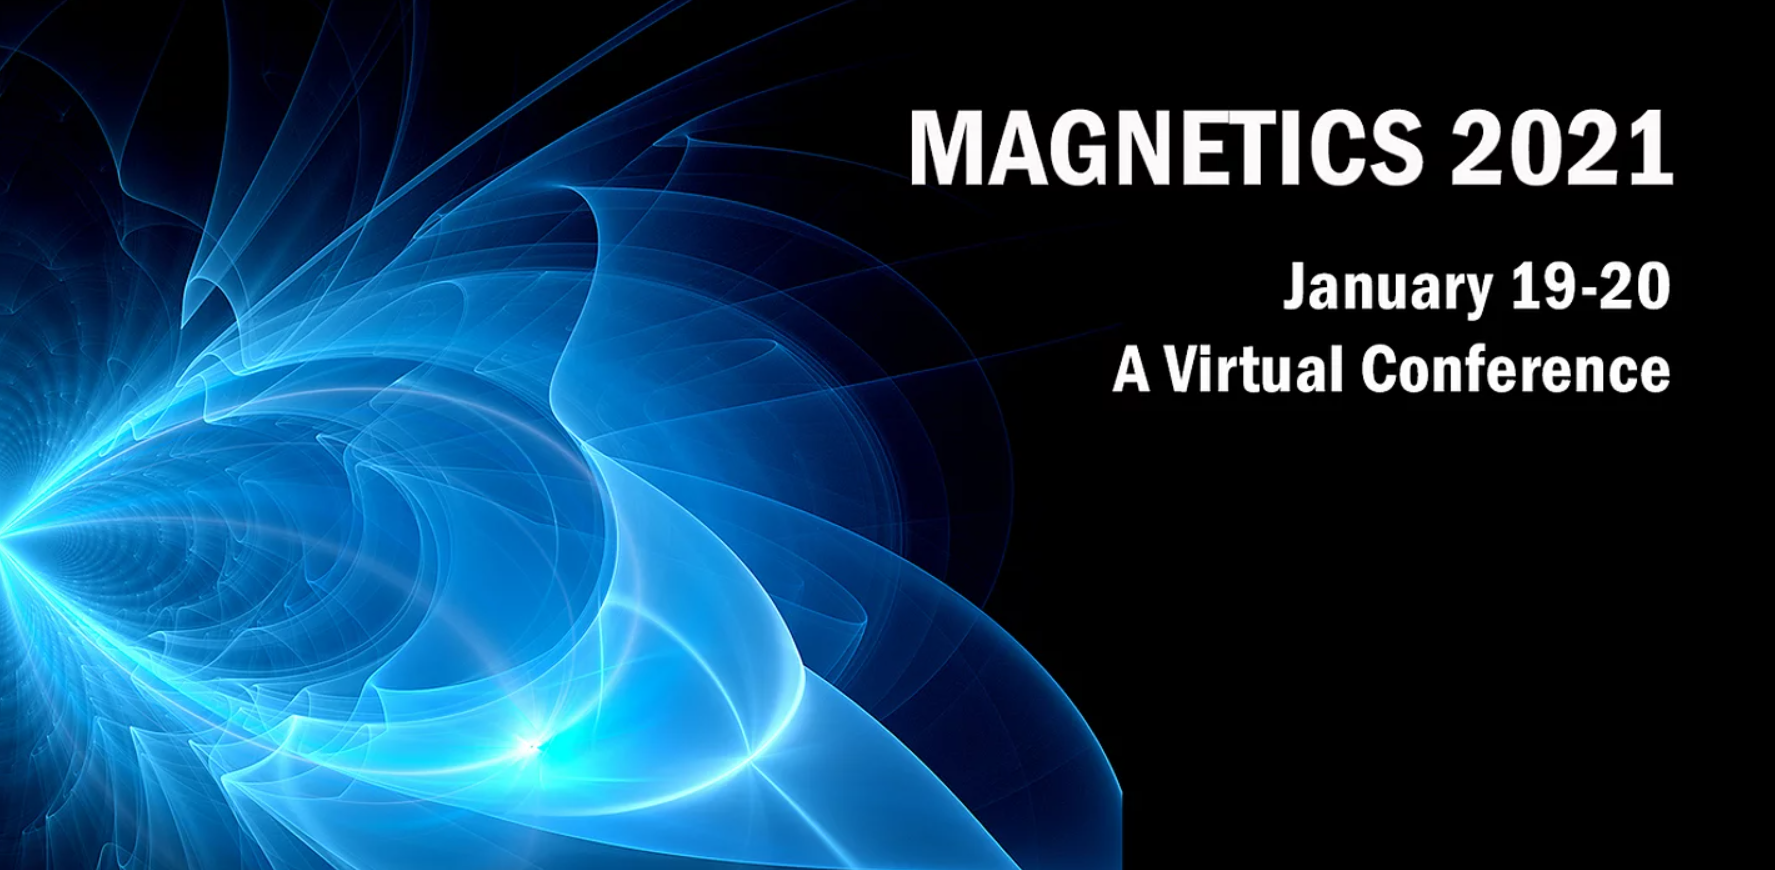 Magnetics 2021 Virtual Conference